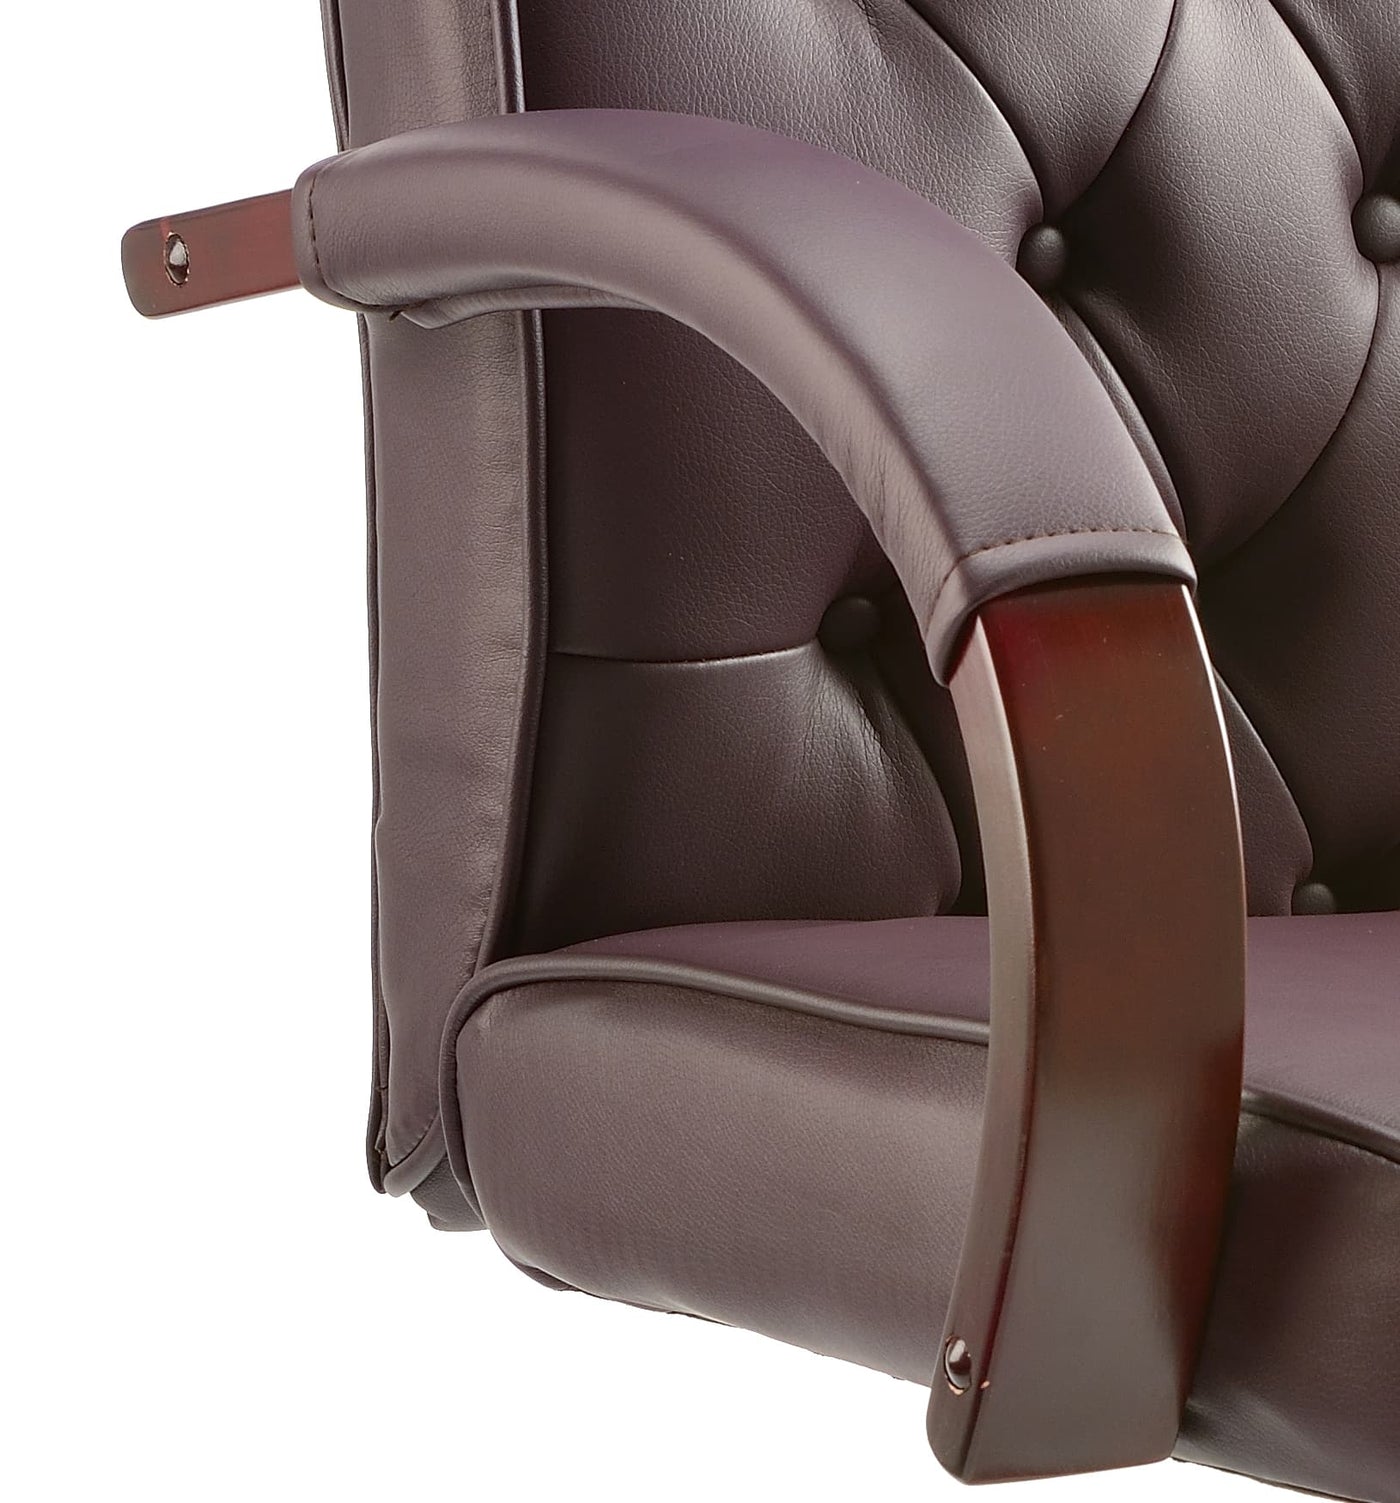 Chesterfield Leather Exec | Home Office Chair | Home Office Furniture | Swivel Office Chair |  Wooden Detail Chair | Soft padded chair